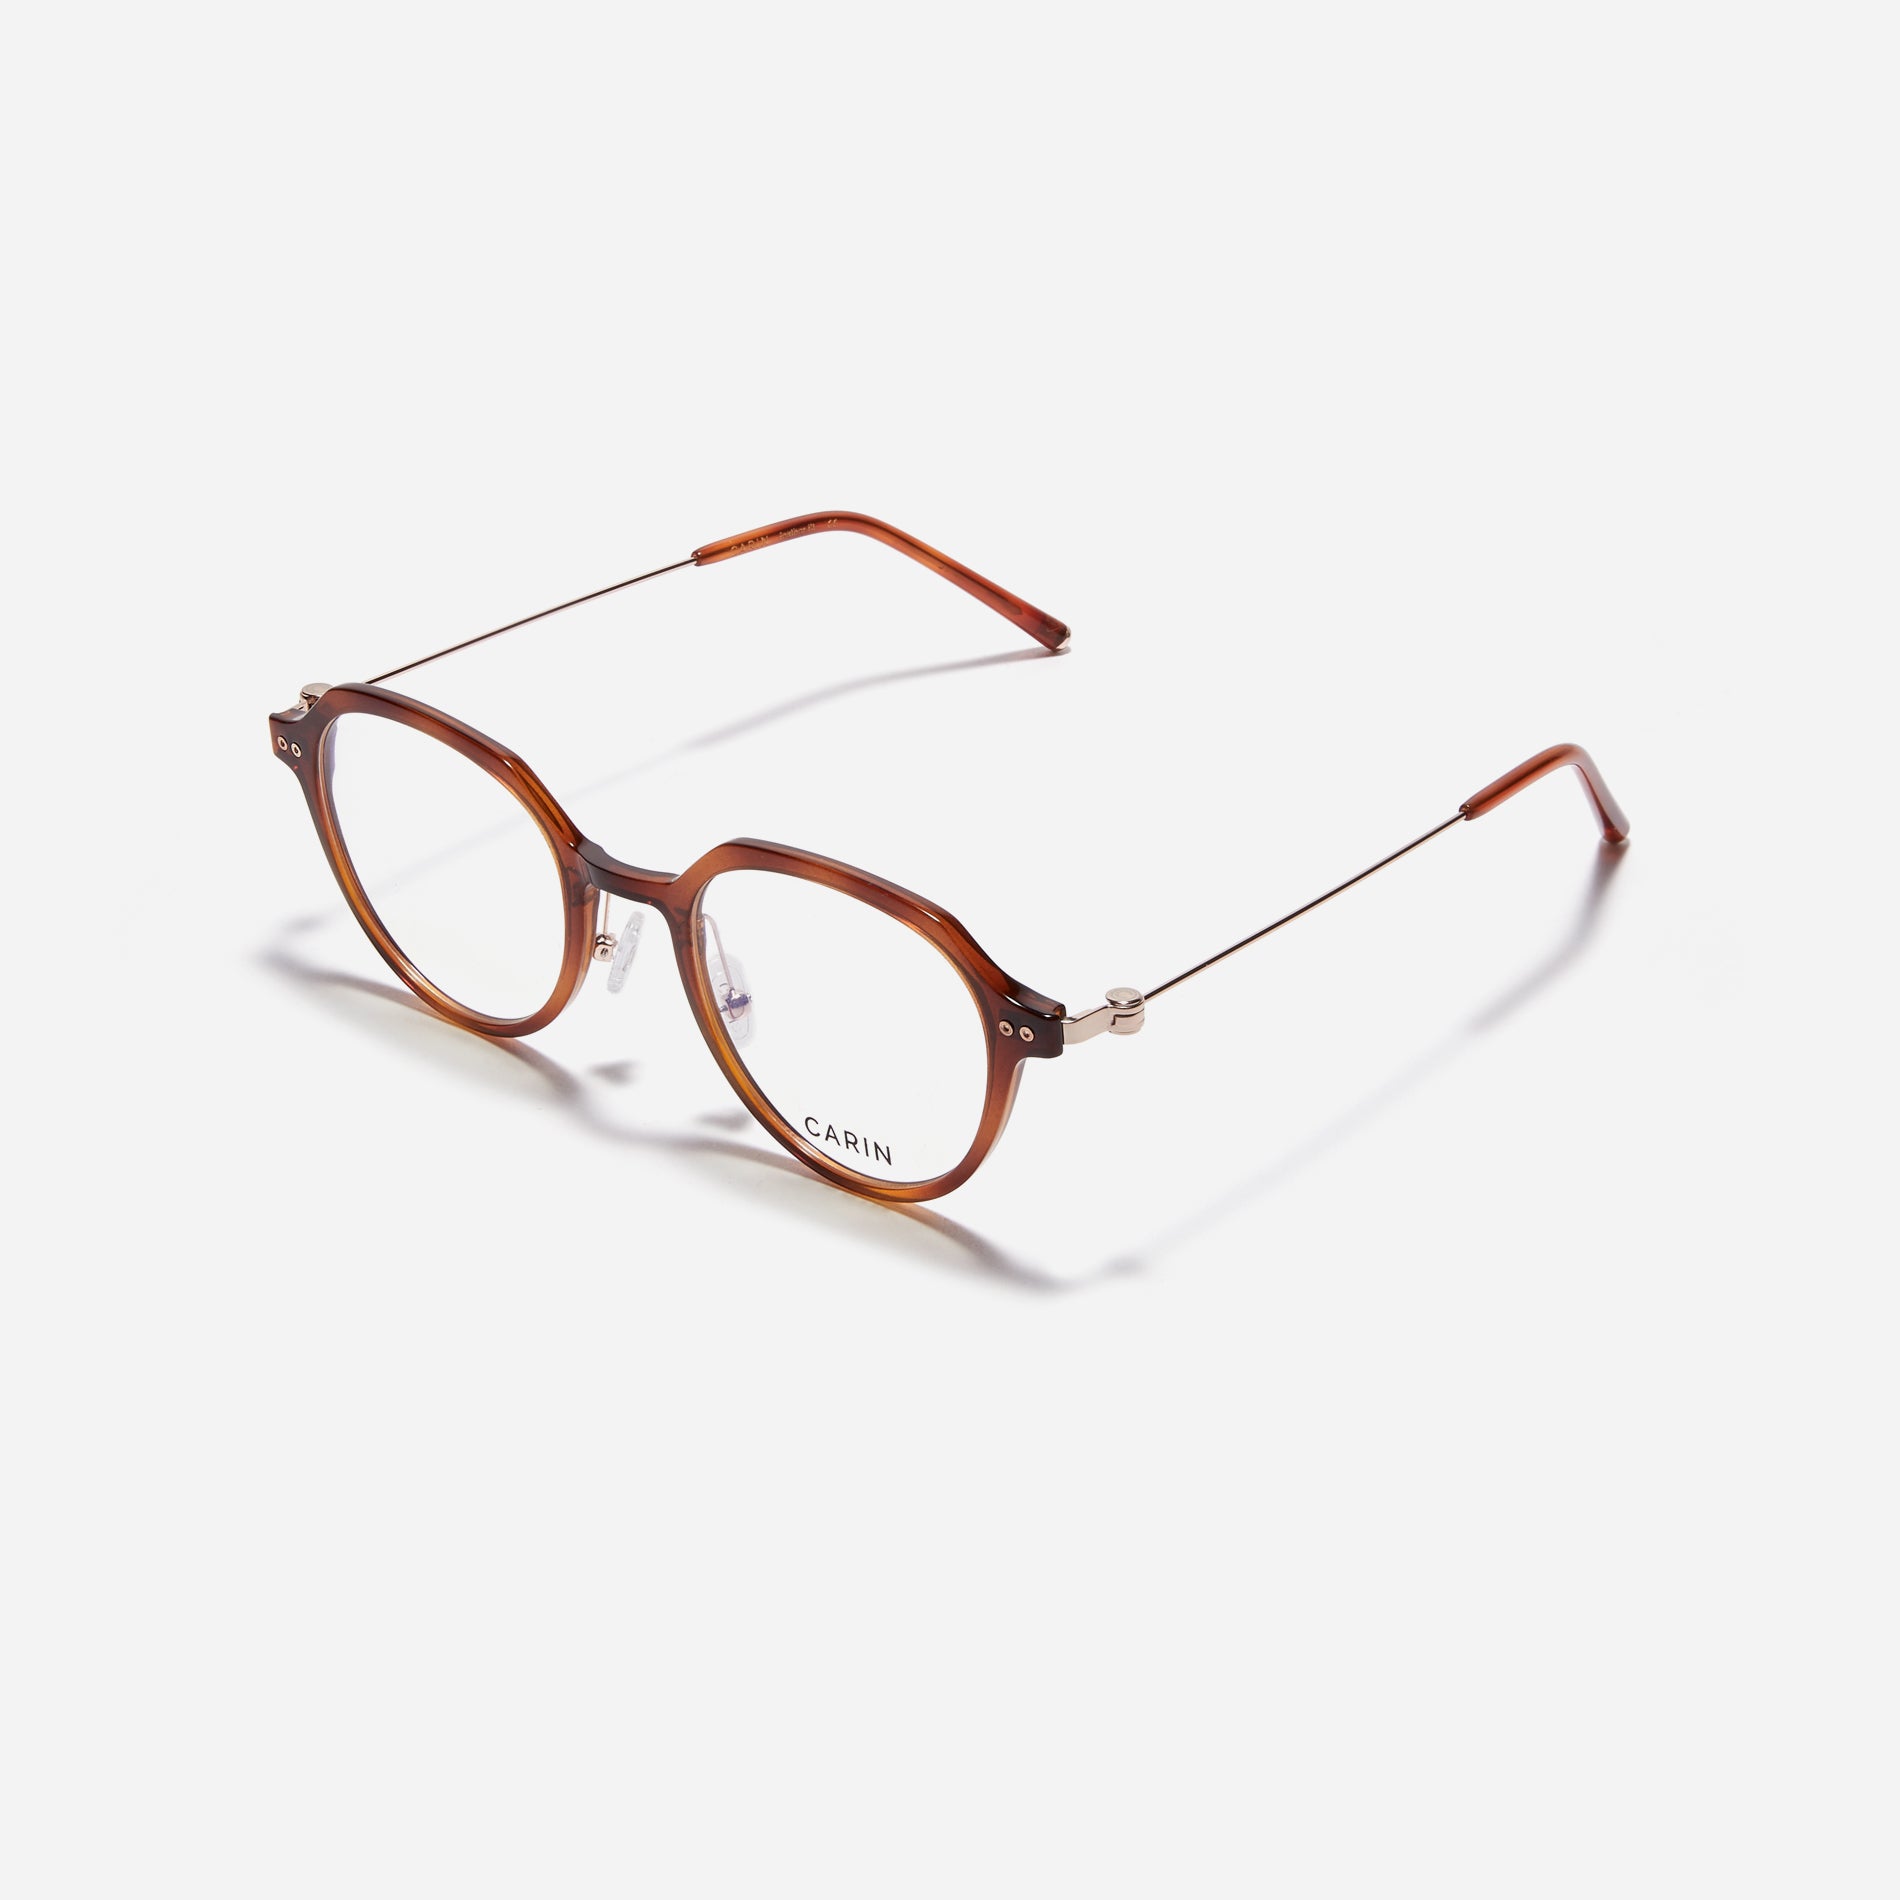 Polygonal-shaped eyeglasses crafted with a blend of G850 bio-plastic and stainless steel, ensuring resilience against breakage. Incorporated with CARIN's patented anti-loosening hinge technology, these eyeglasses ensure a consistently comfortable fit.